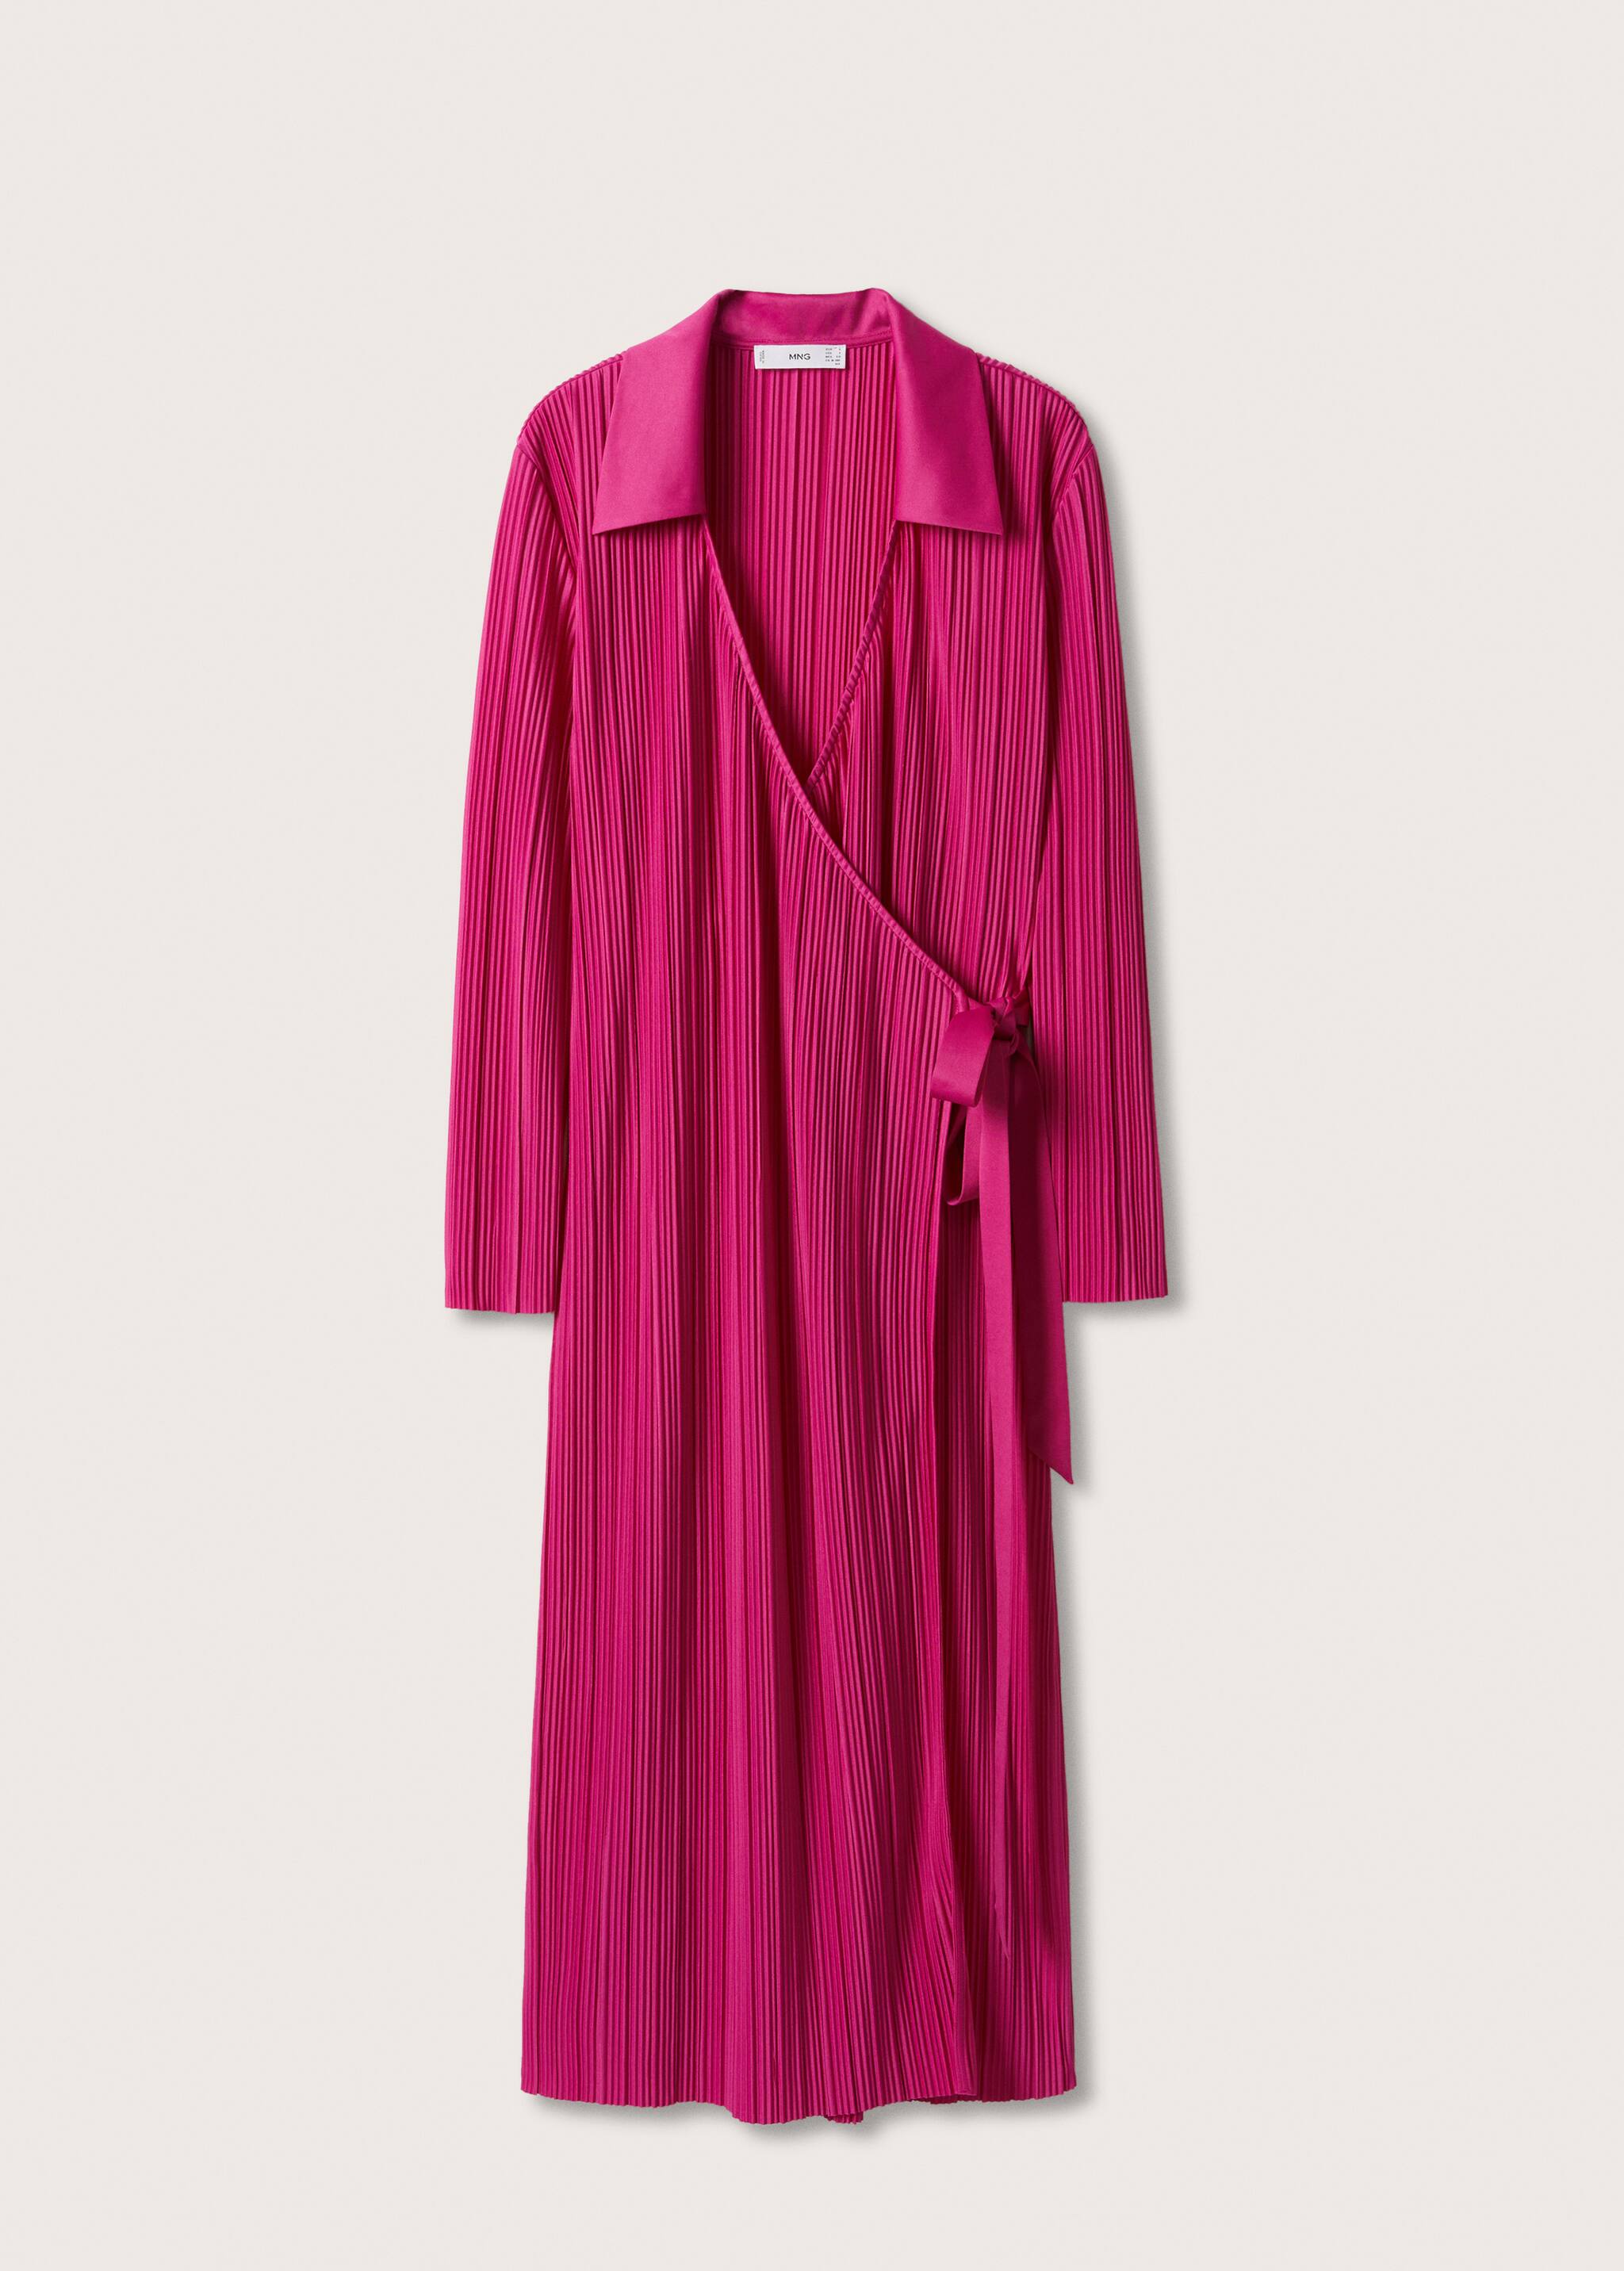 Pleated wrap dress - Article without model